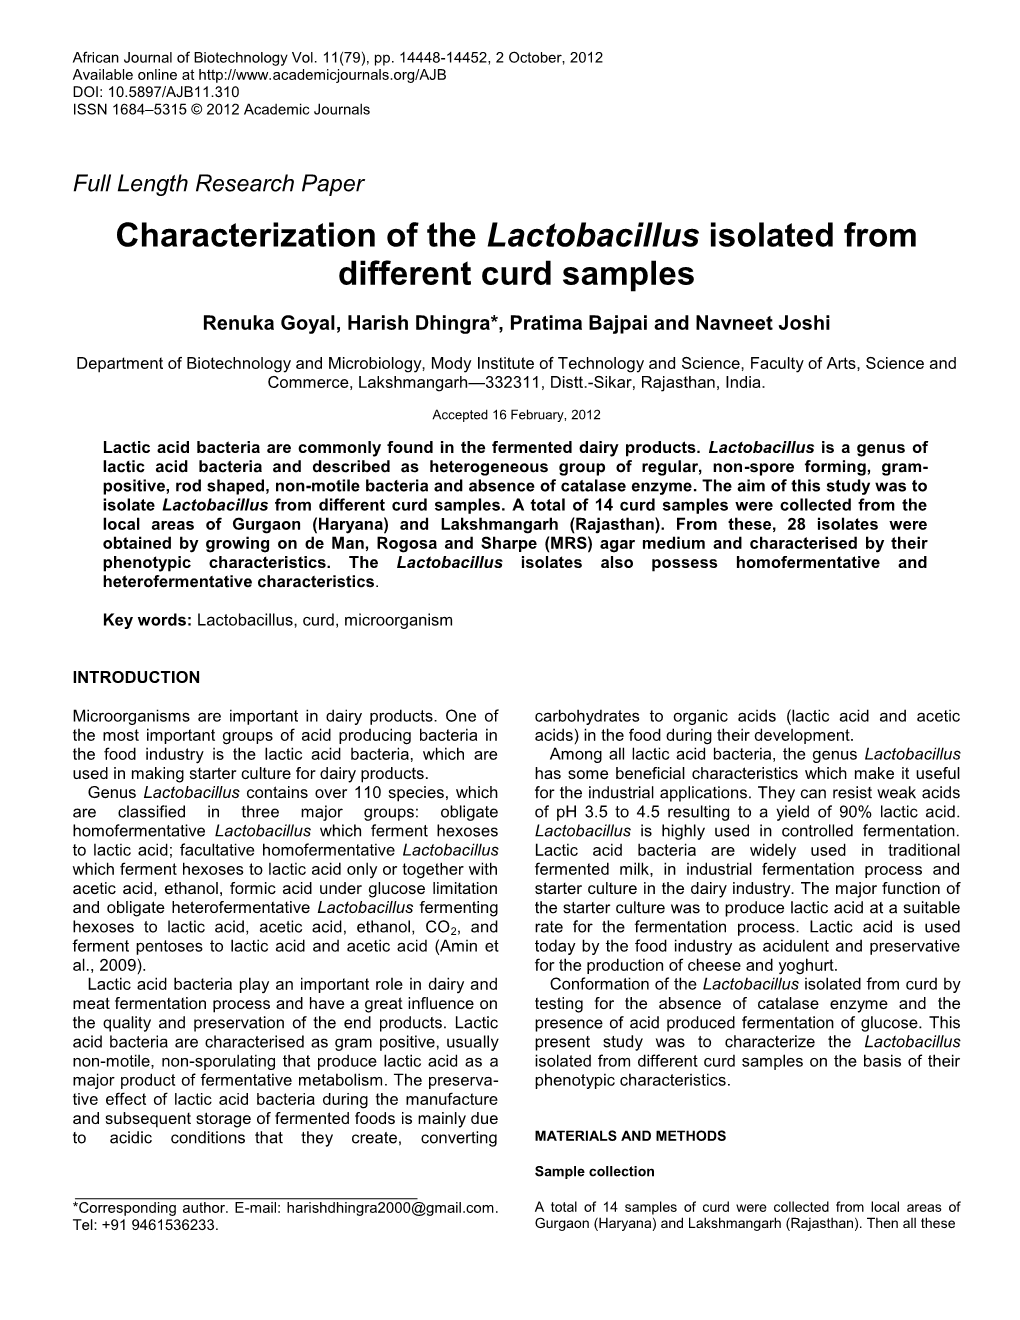 Characterization of the Lactobacillus Isolated from Different Curd Samples